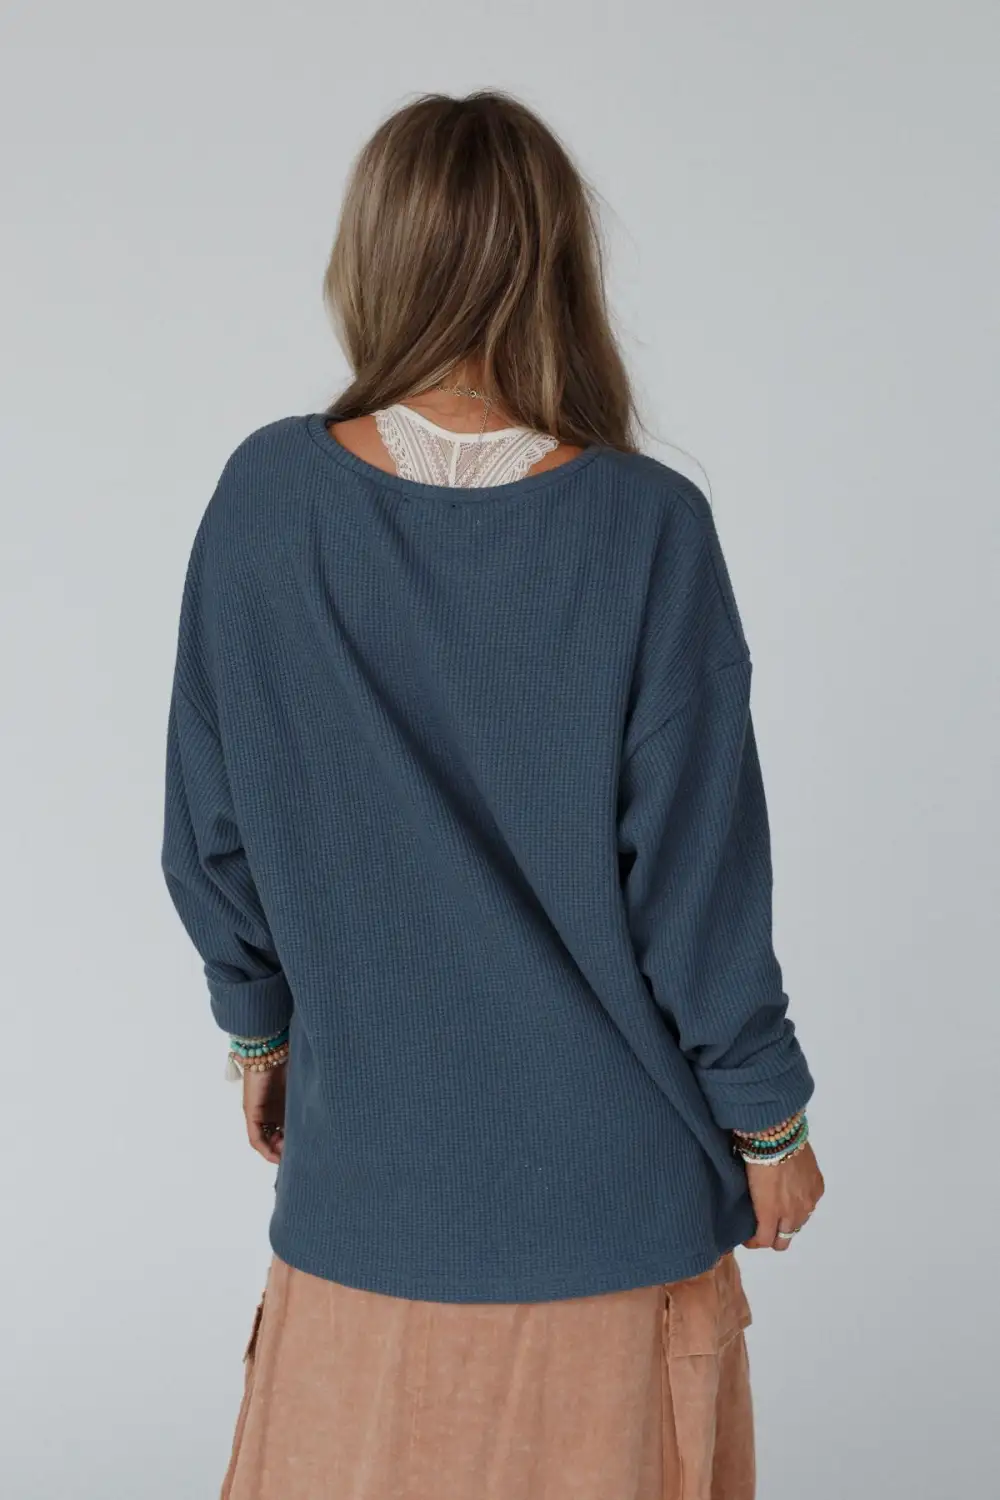 Soaring Skies Graphic Pullover Top - Teal